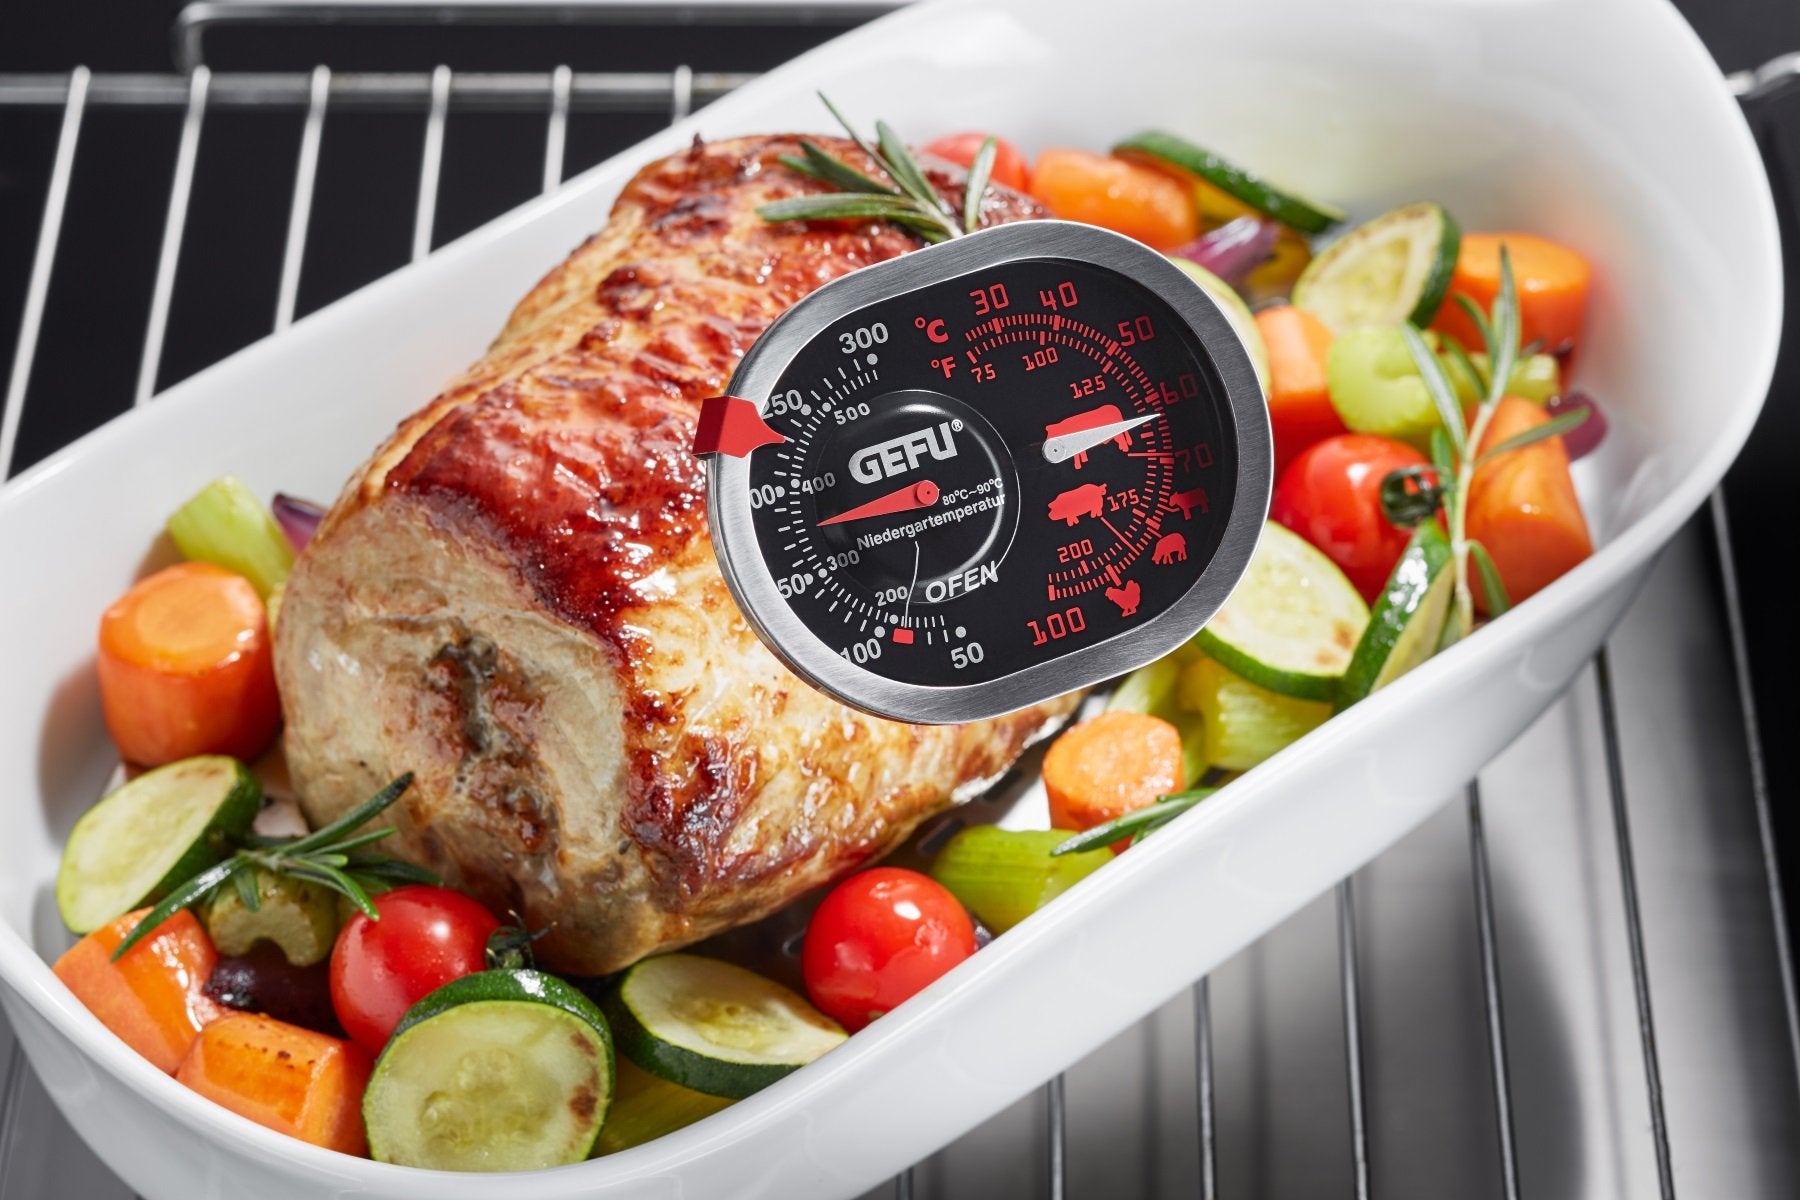 GEFU Roast And Oven Thermometer 3 In 1 Messimo - Whole and All